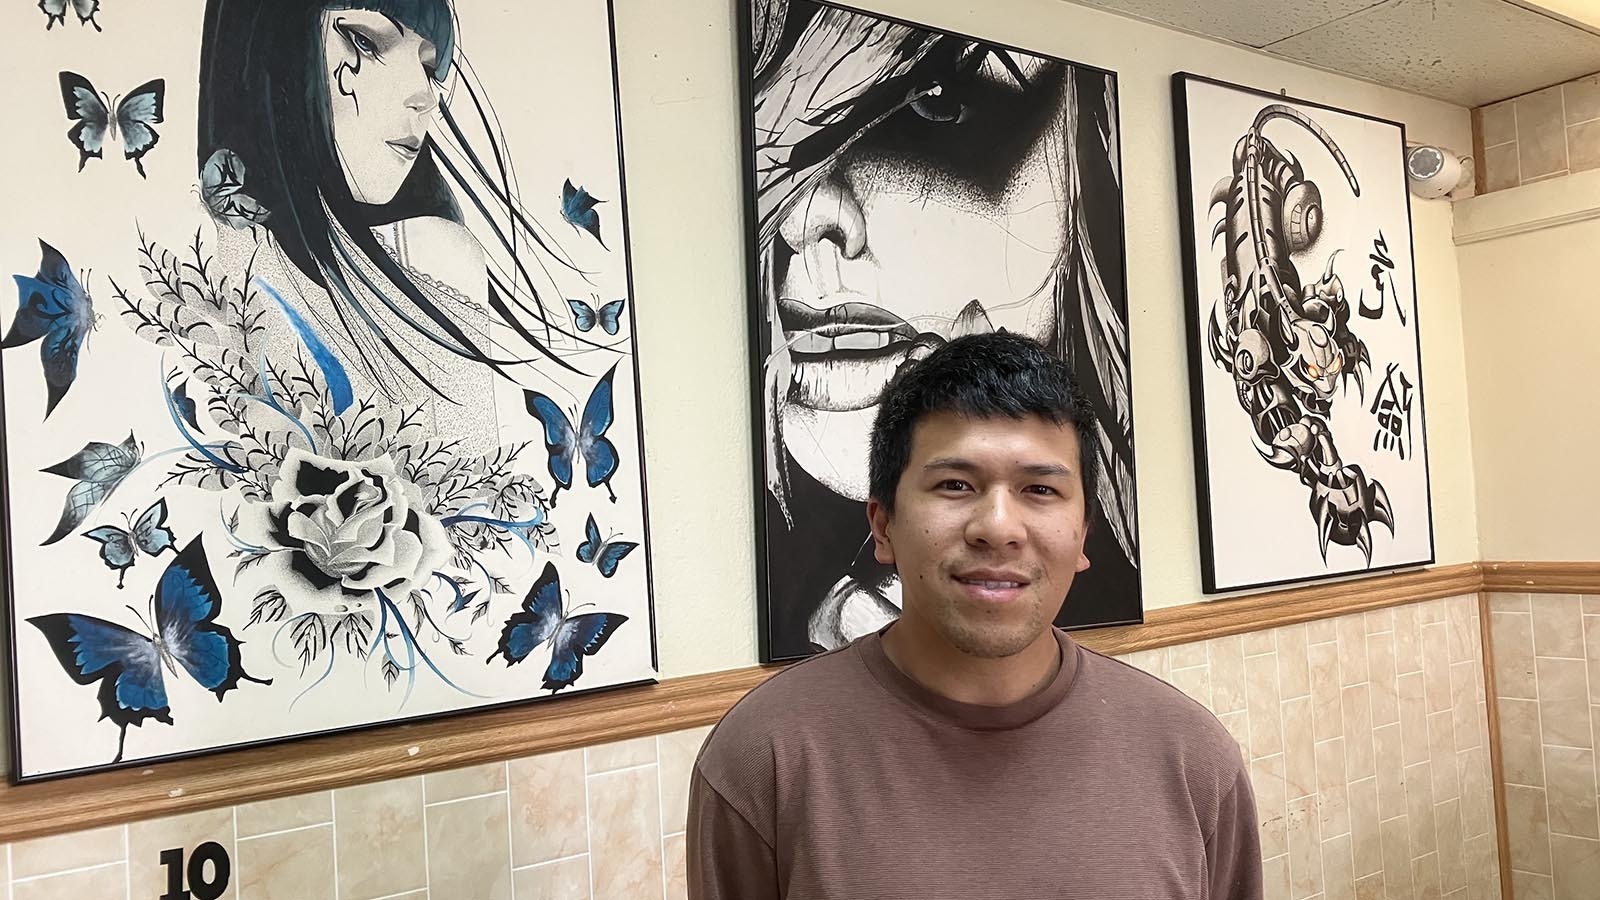 Pho Saigon Manager Hieu Le has painted all of the poster-like artwork that covers the walls at Pho Saigon.